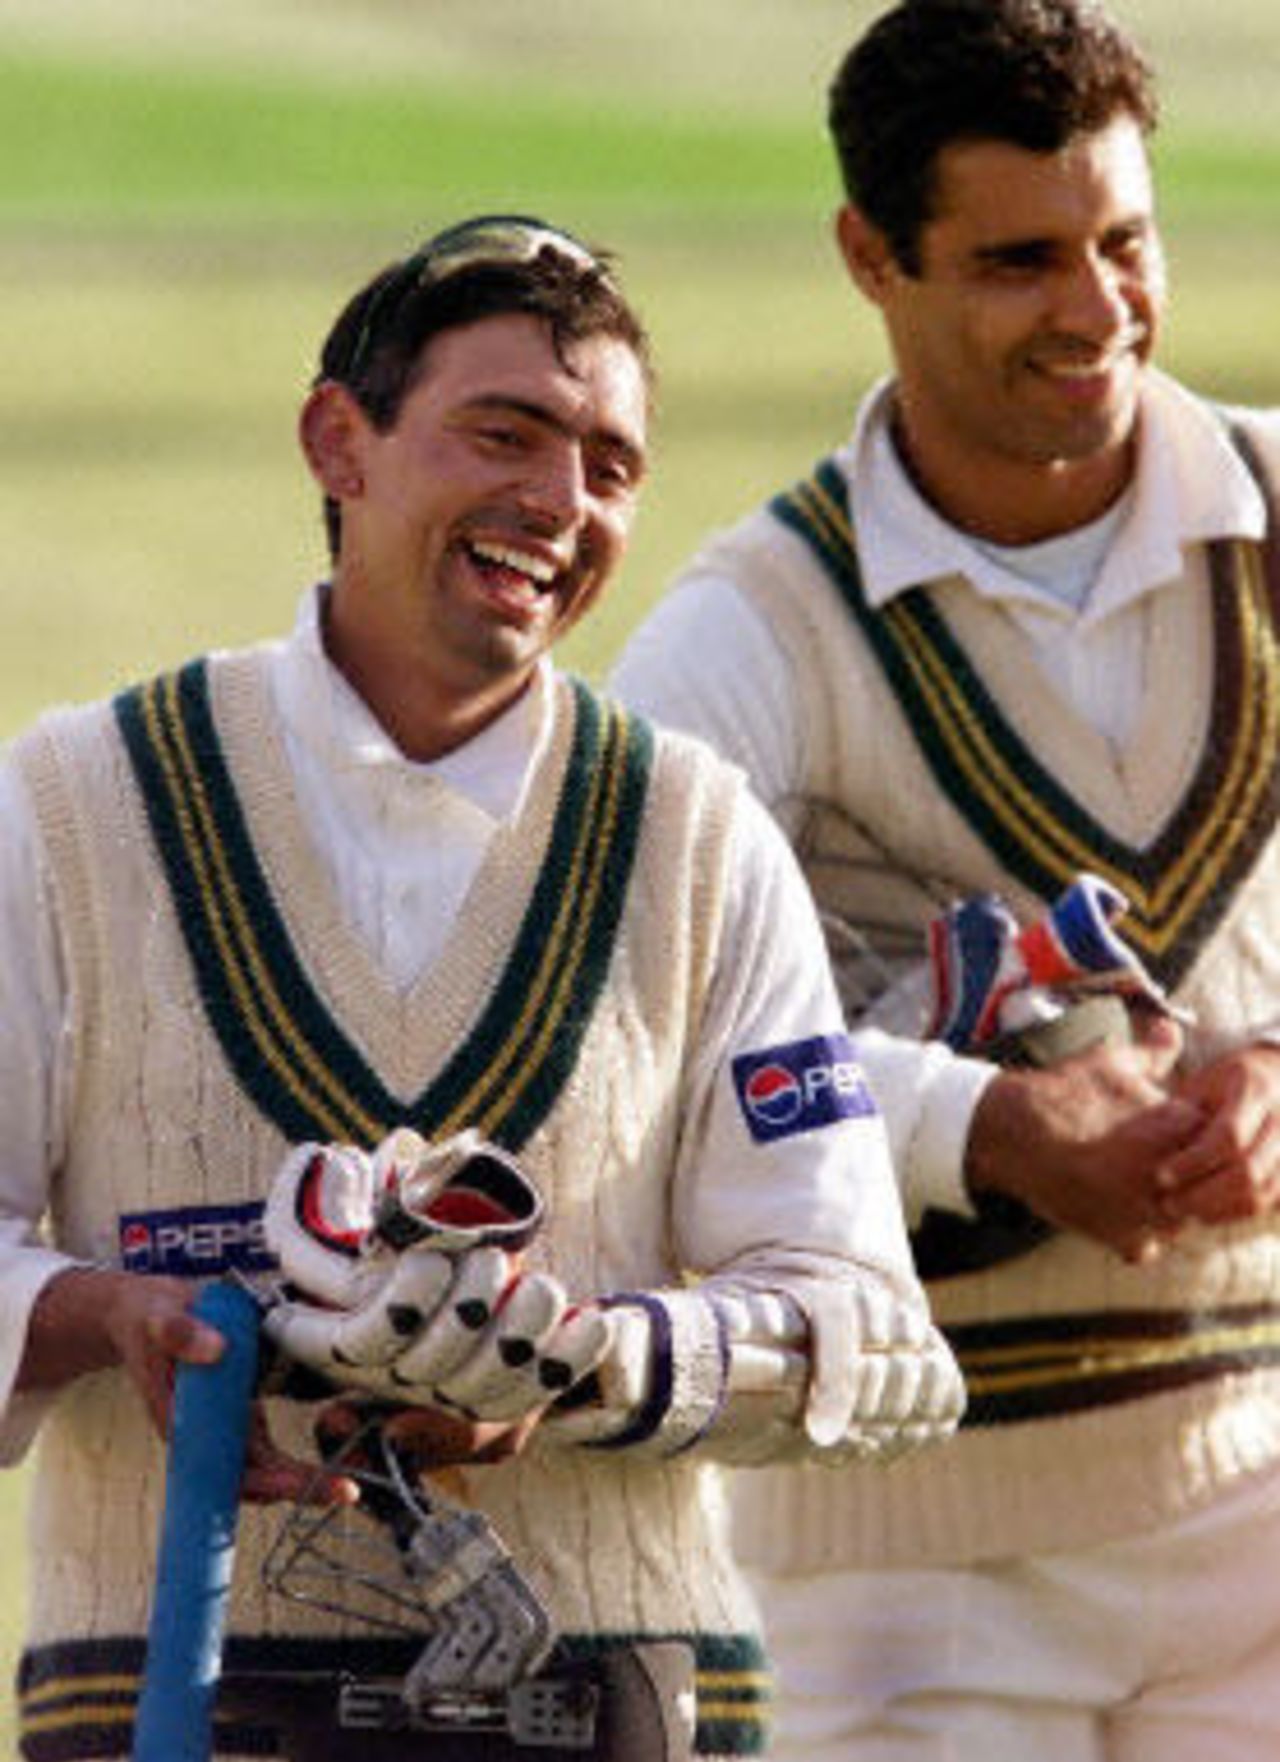 Saqlain Mushtaq is all smiles after batting all day to be 98 not out at stumps with compatriot Waqar Younis,  day 4, 2nd Test at Christchurch, 15-19 March 2001.